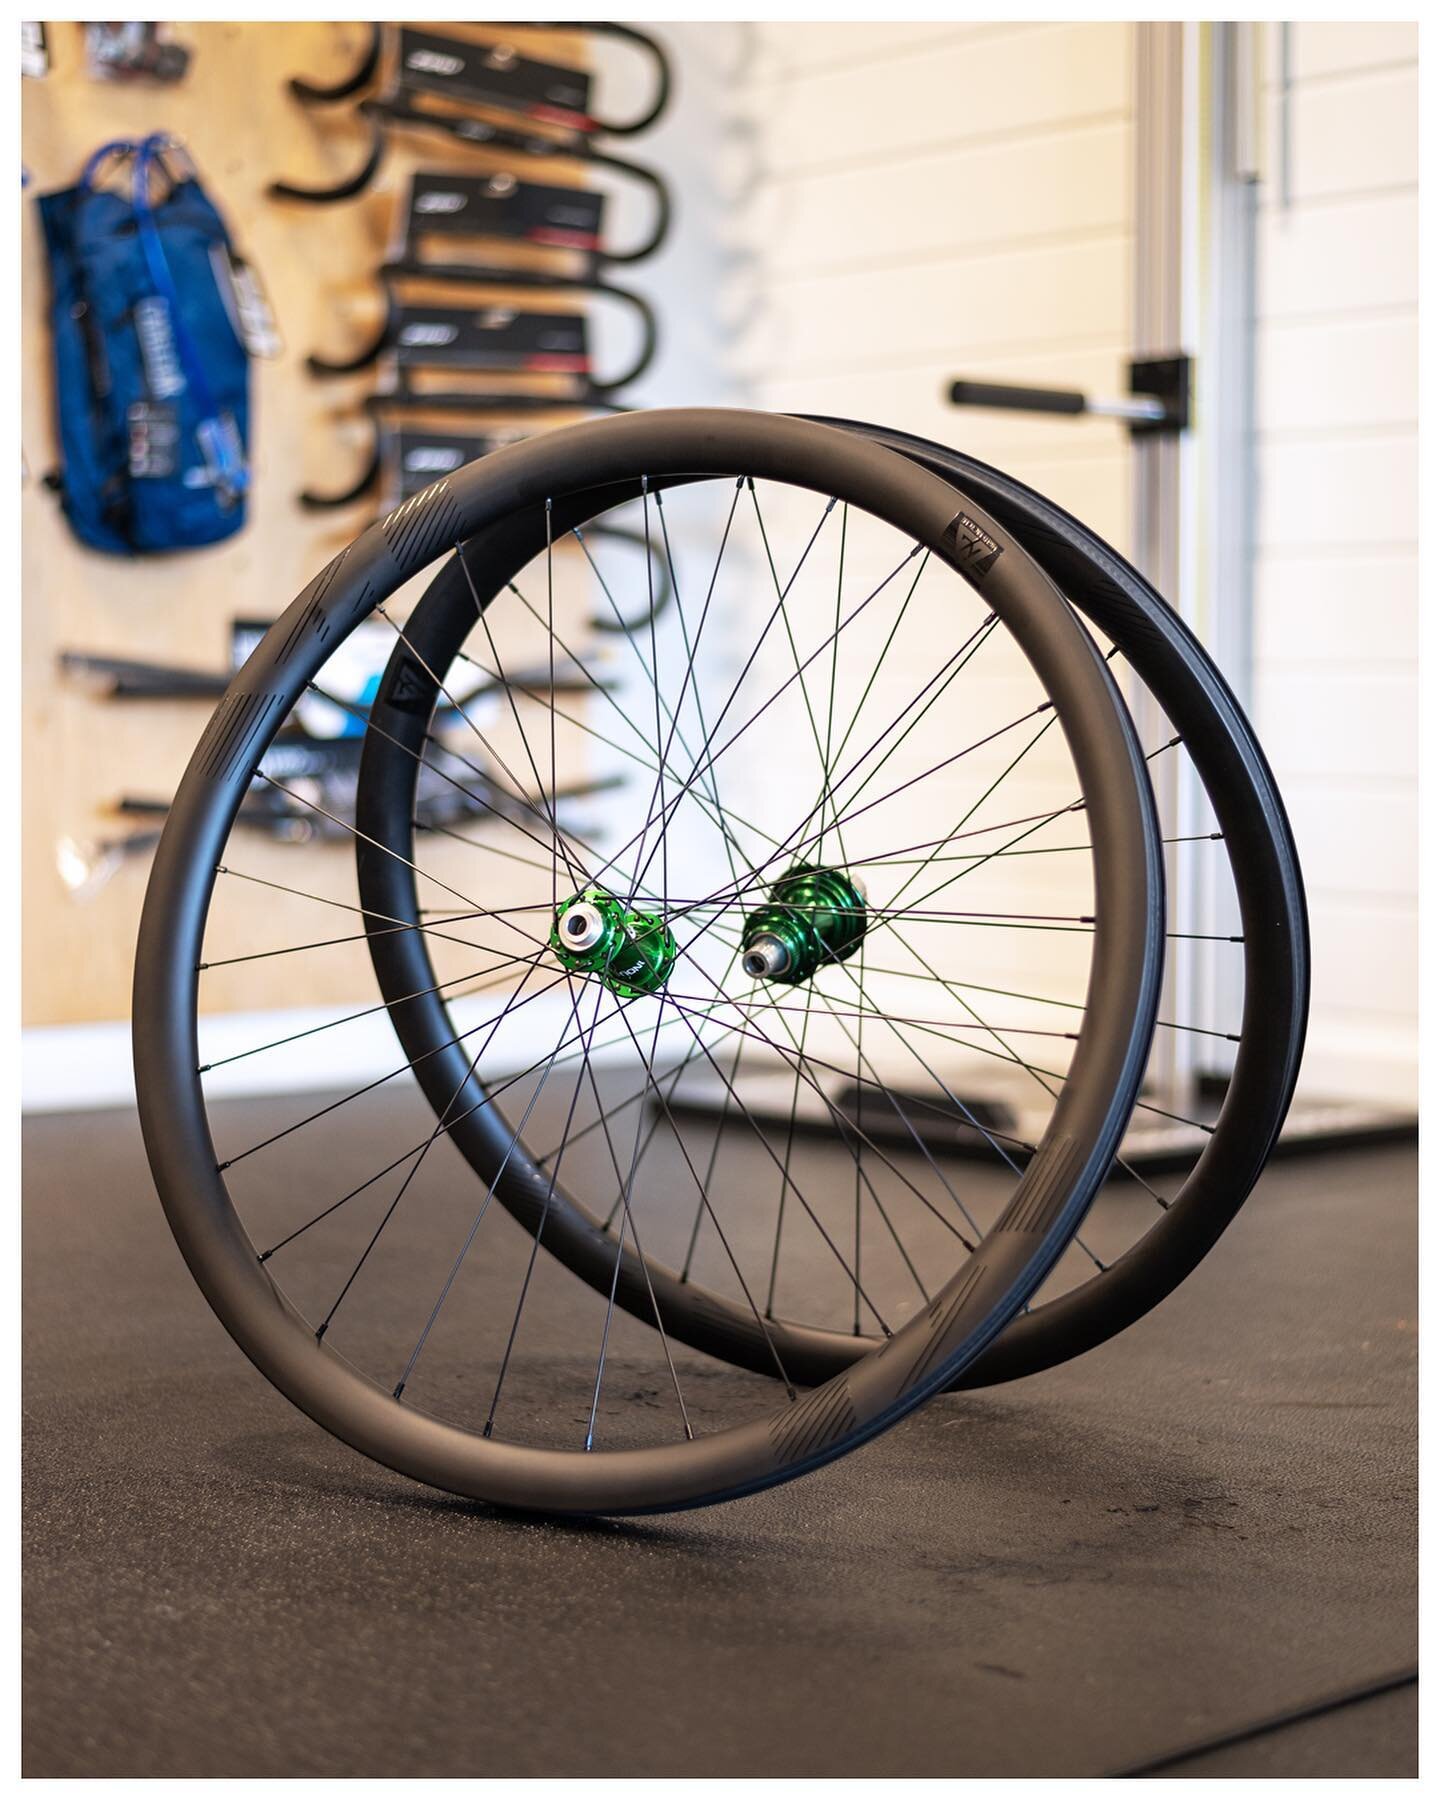 Industry Nine hubs, Sapim D-Light spokes, and Light Bicycle WR35 carbon rims, for Jeff.  This versatile, hooked, tubeless compatible wheelset is a significant upgrade from the manufacturer spec&rsquo;d wheels on his current gravel rig. 
#bicyclehouse